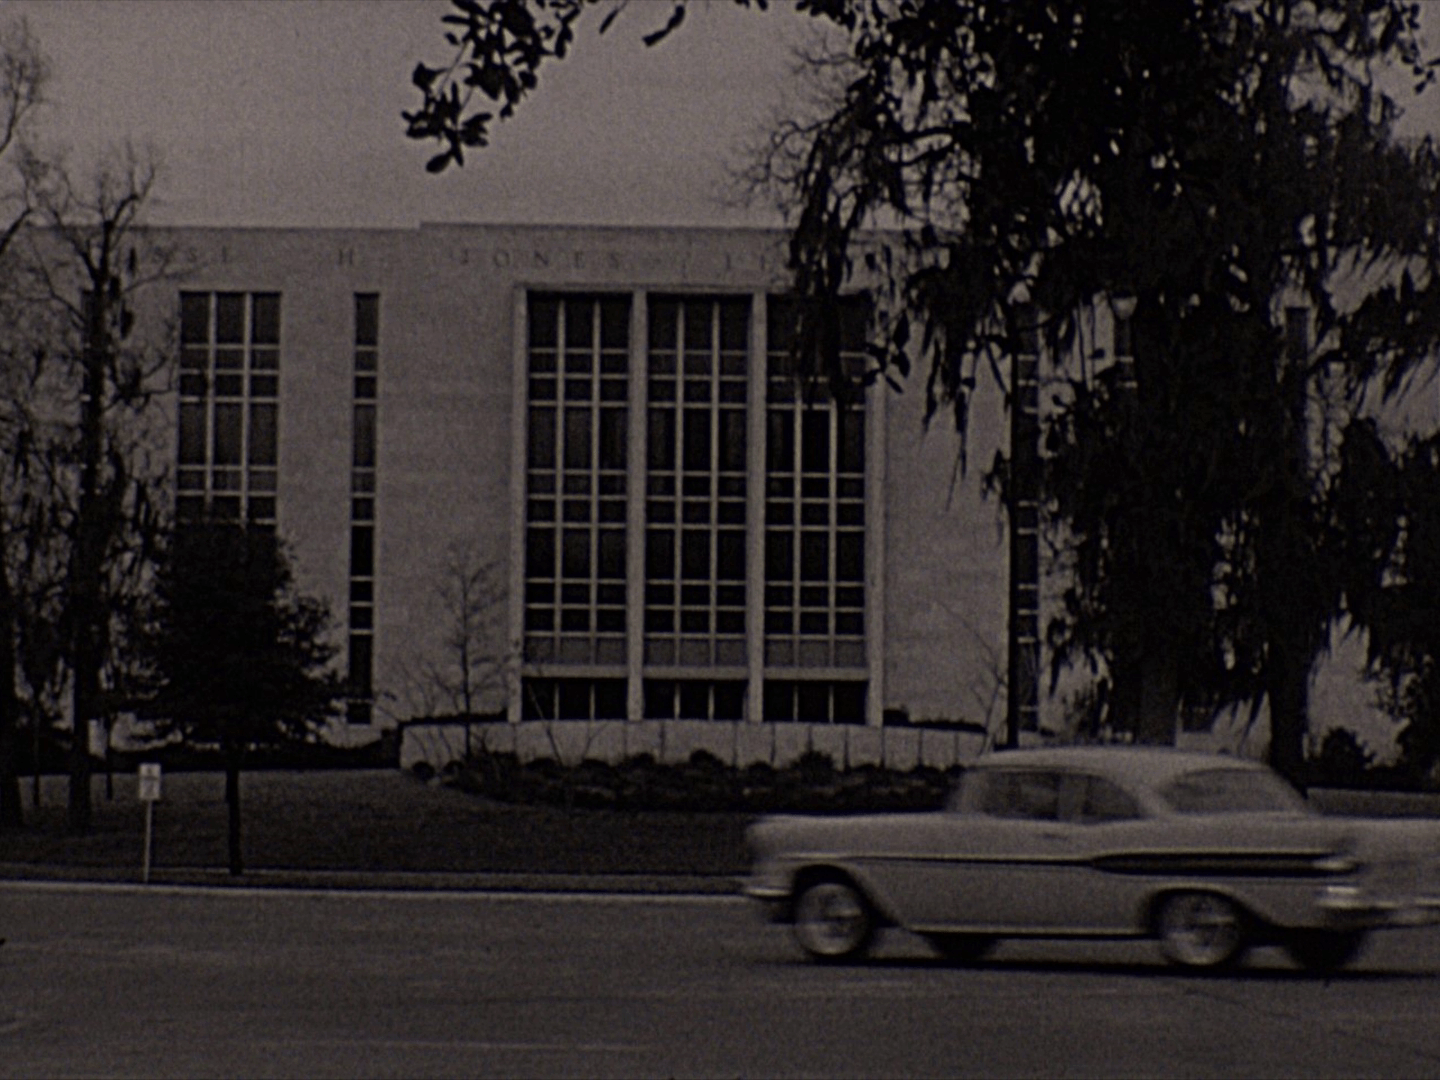 Jesse Jones Library building, Home of The TMC Library (HD). [Screenshot from "Help Wanted" (1958), AVF.MS238.001, MS 238 Films on Mental Health provided by Bill Schnapp, McGovern Historical Center, Texas Medical Center Library]